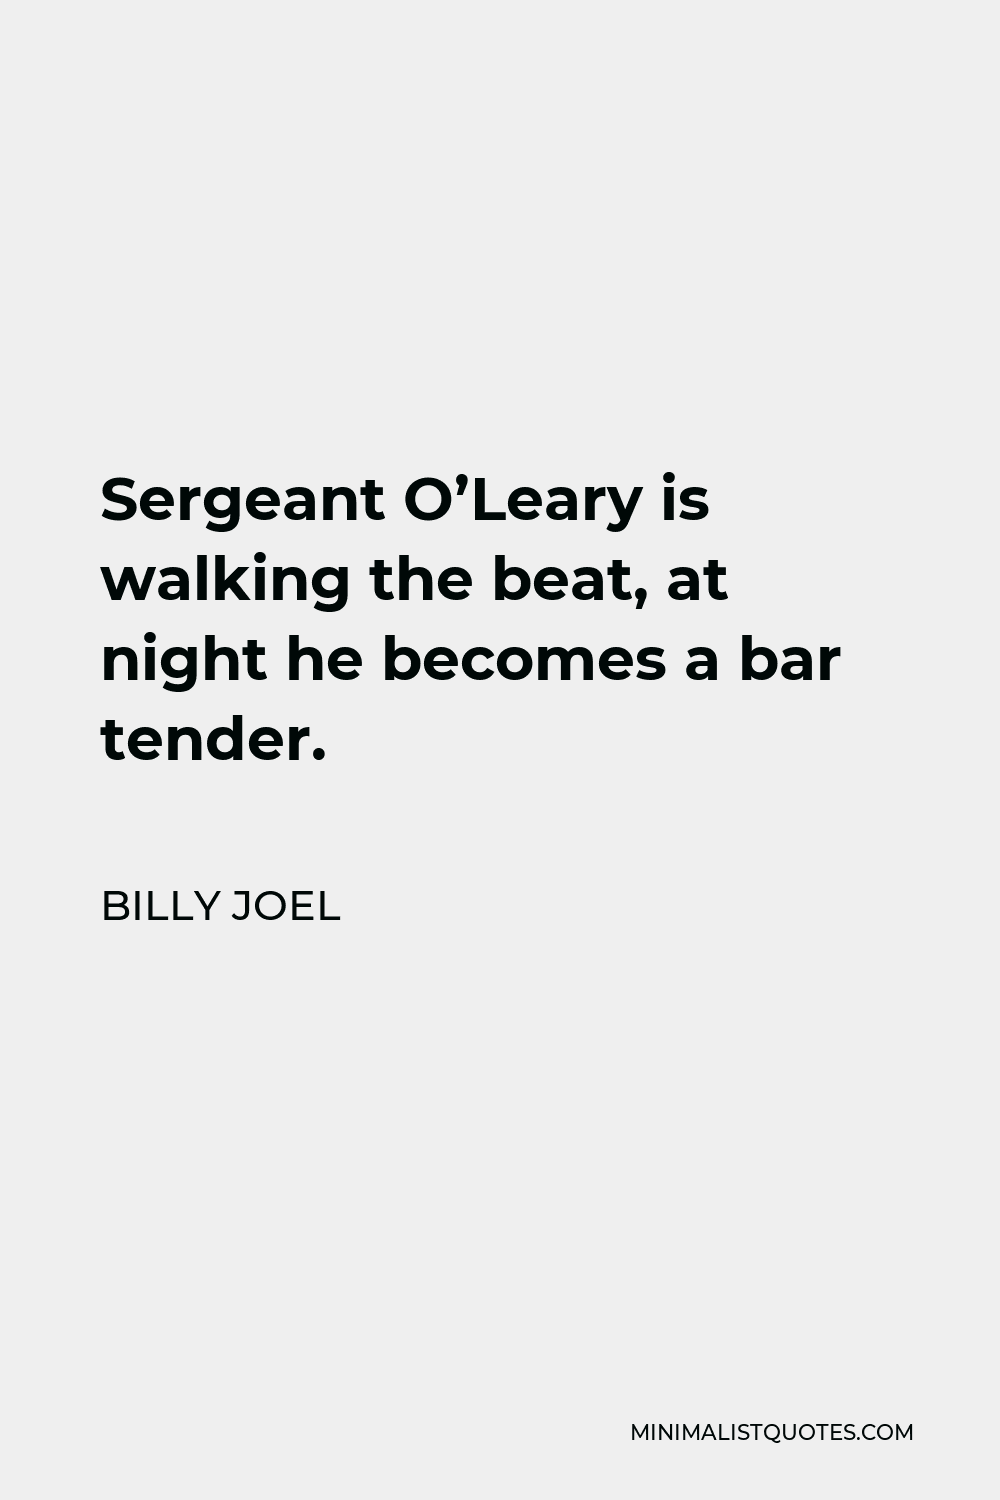 Billy Joel Quote - Sergeant O’Leary is walking the beat, at night he becomes a bar tender.